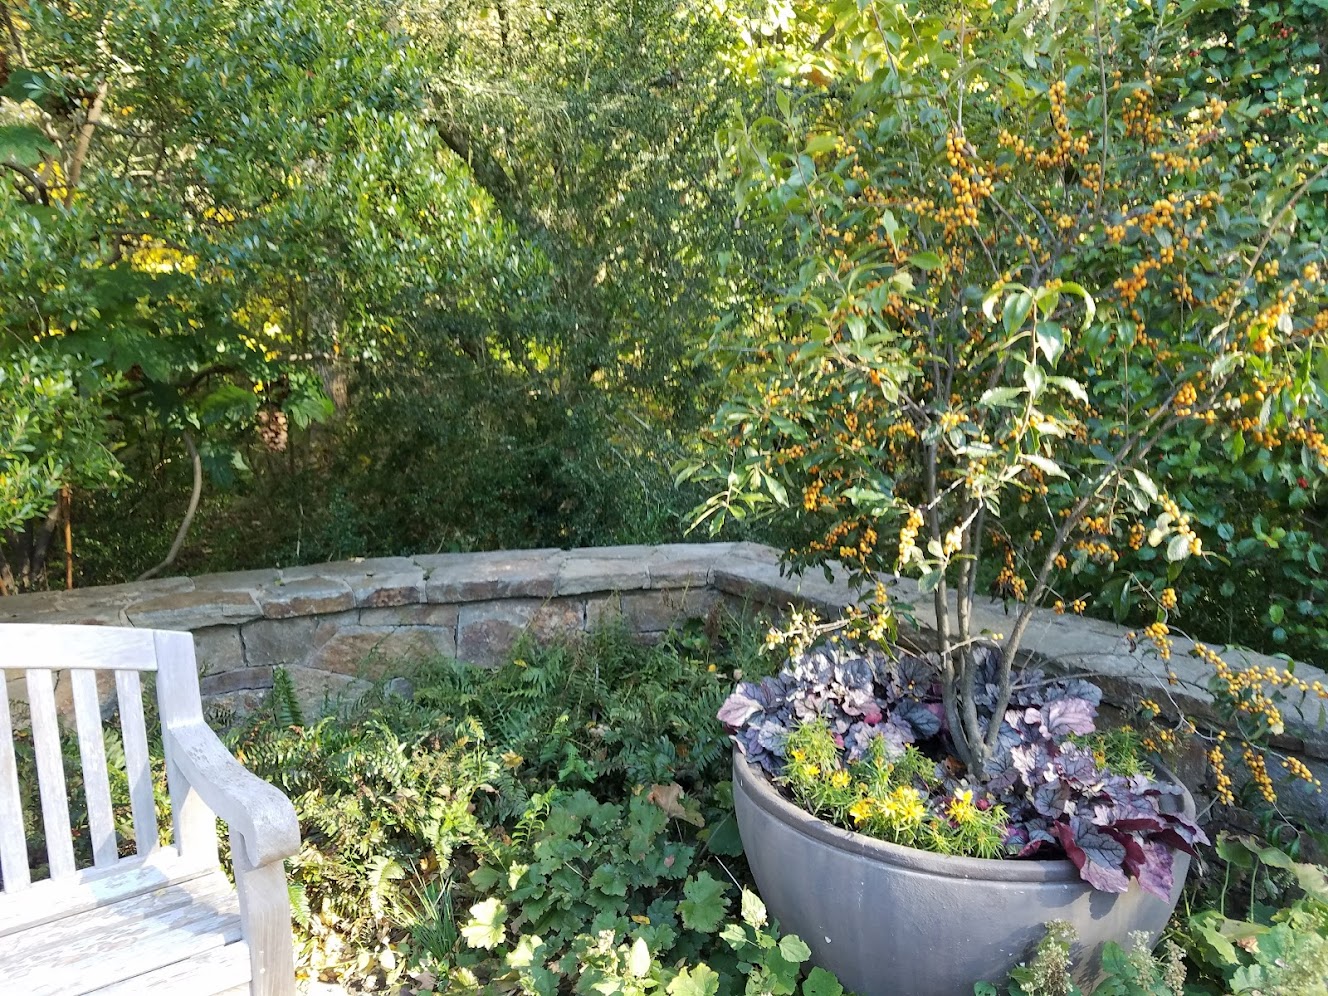 A large pot containing multiple plants sits next to a wooden bench and in the corner of a stone walled terrace.